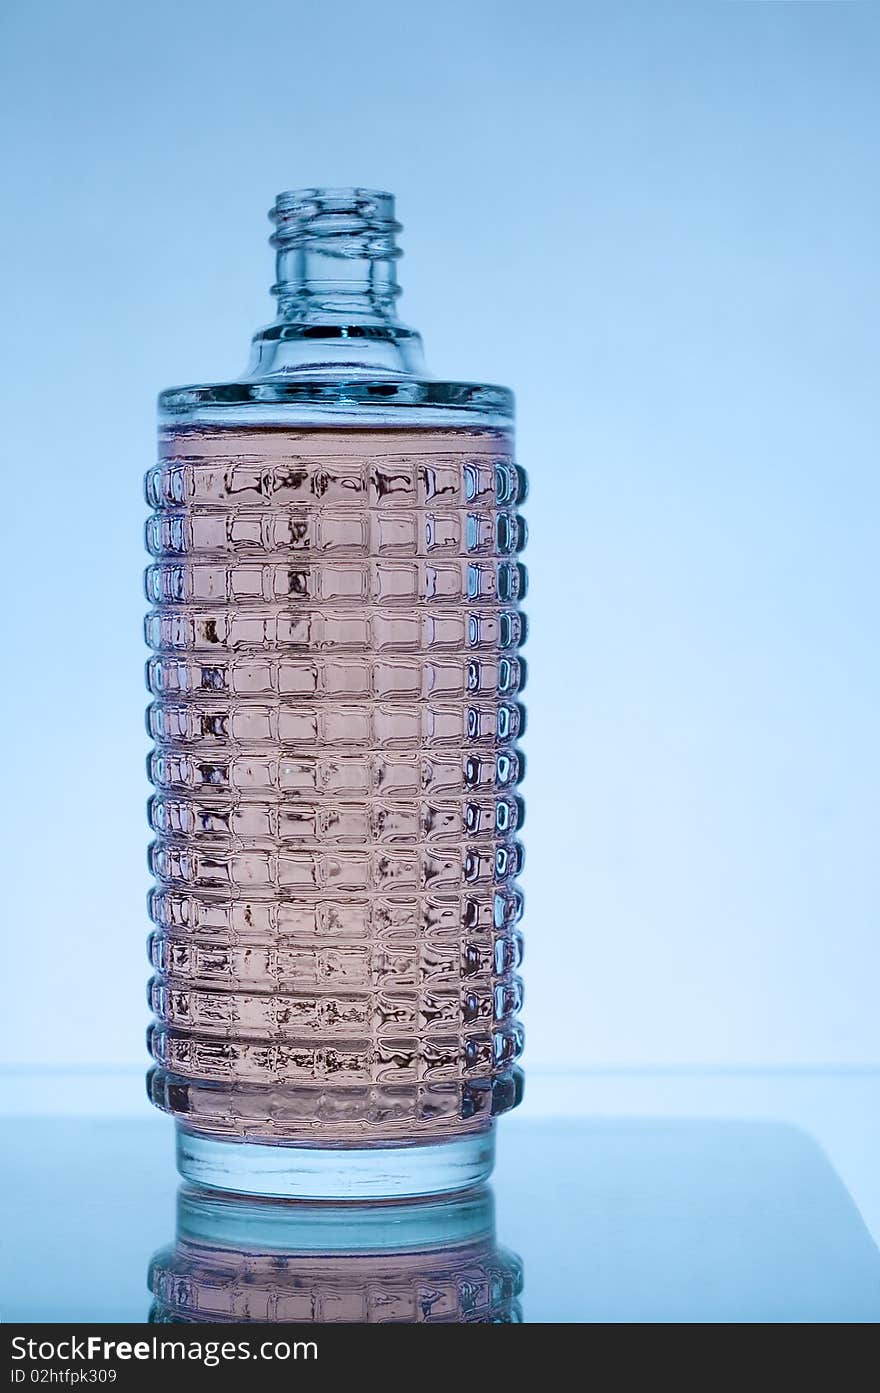 Bottle of perfume isolated over a blue background with reflection. Bottle of perfume isolated over a blue background with reflection.